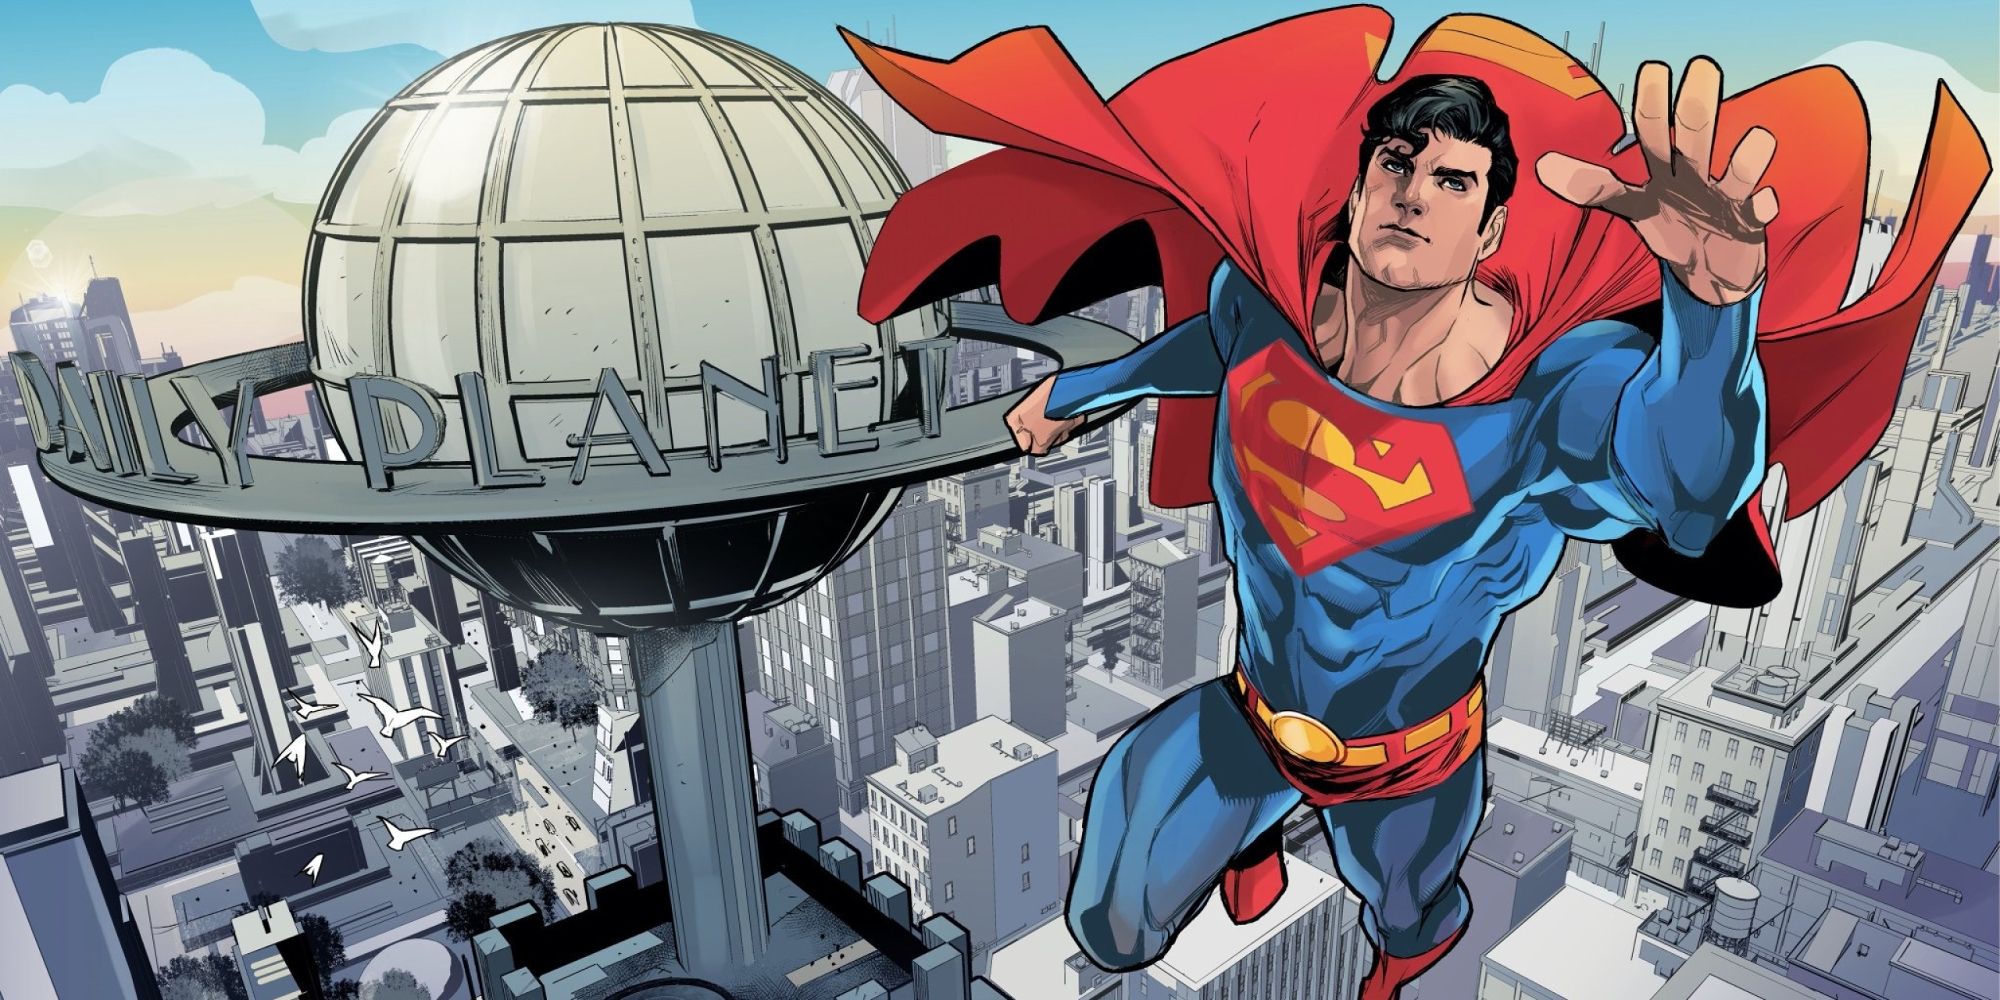 Superman flying past the Daily Planet in Metropolis.